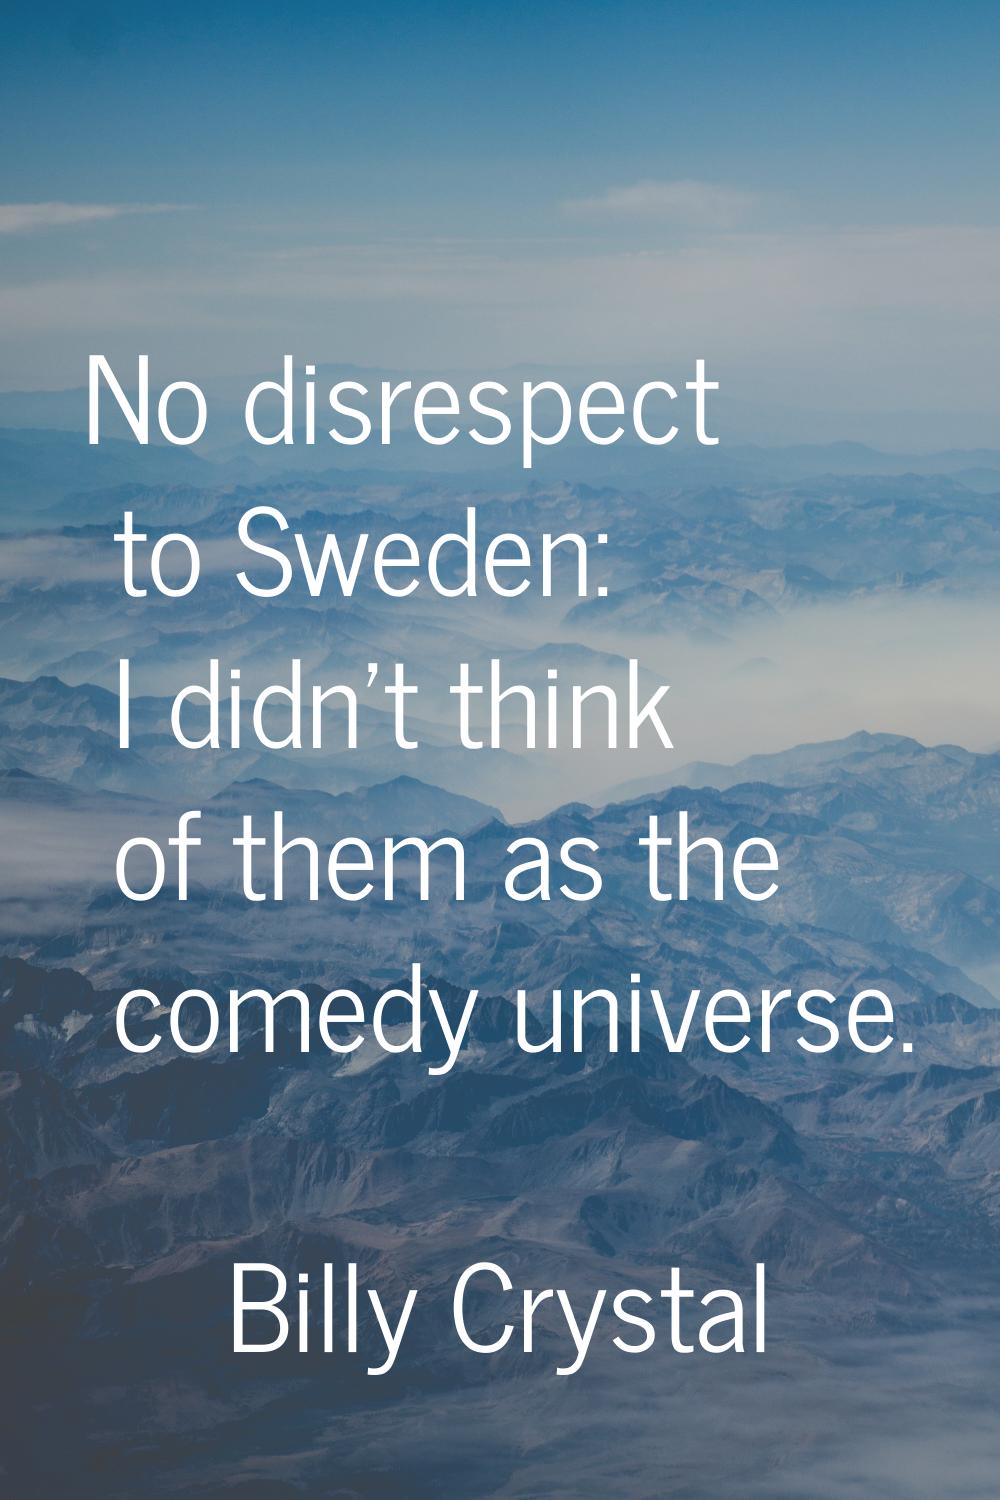 No disrespect to Sweden: I didn't think of them as the comedy universe.